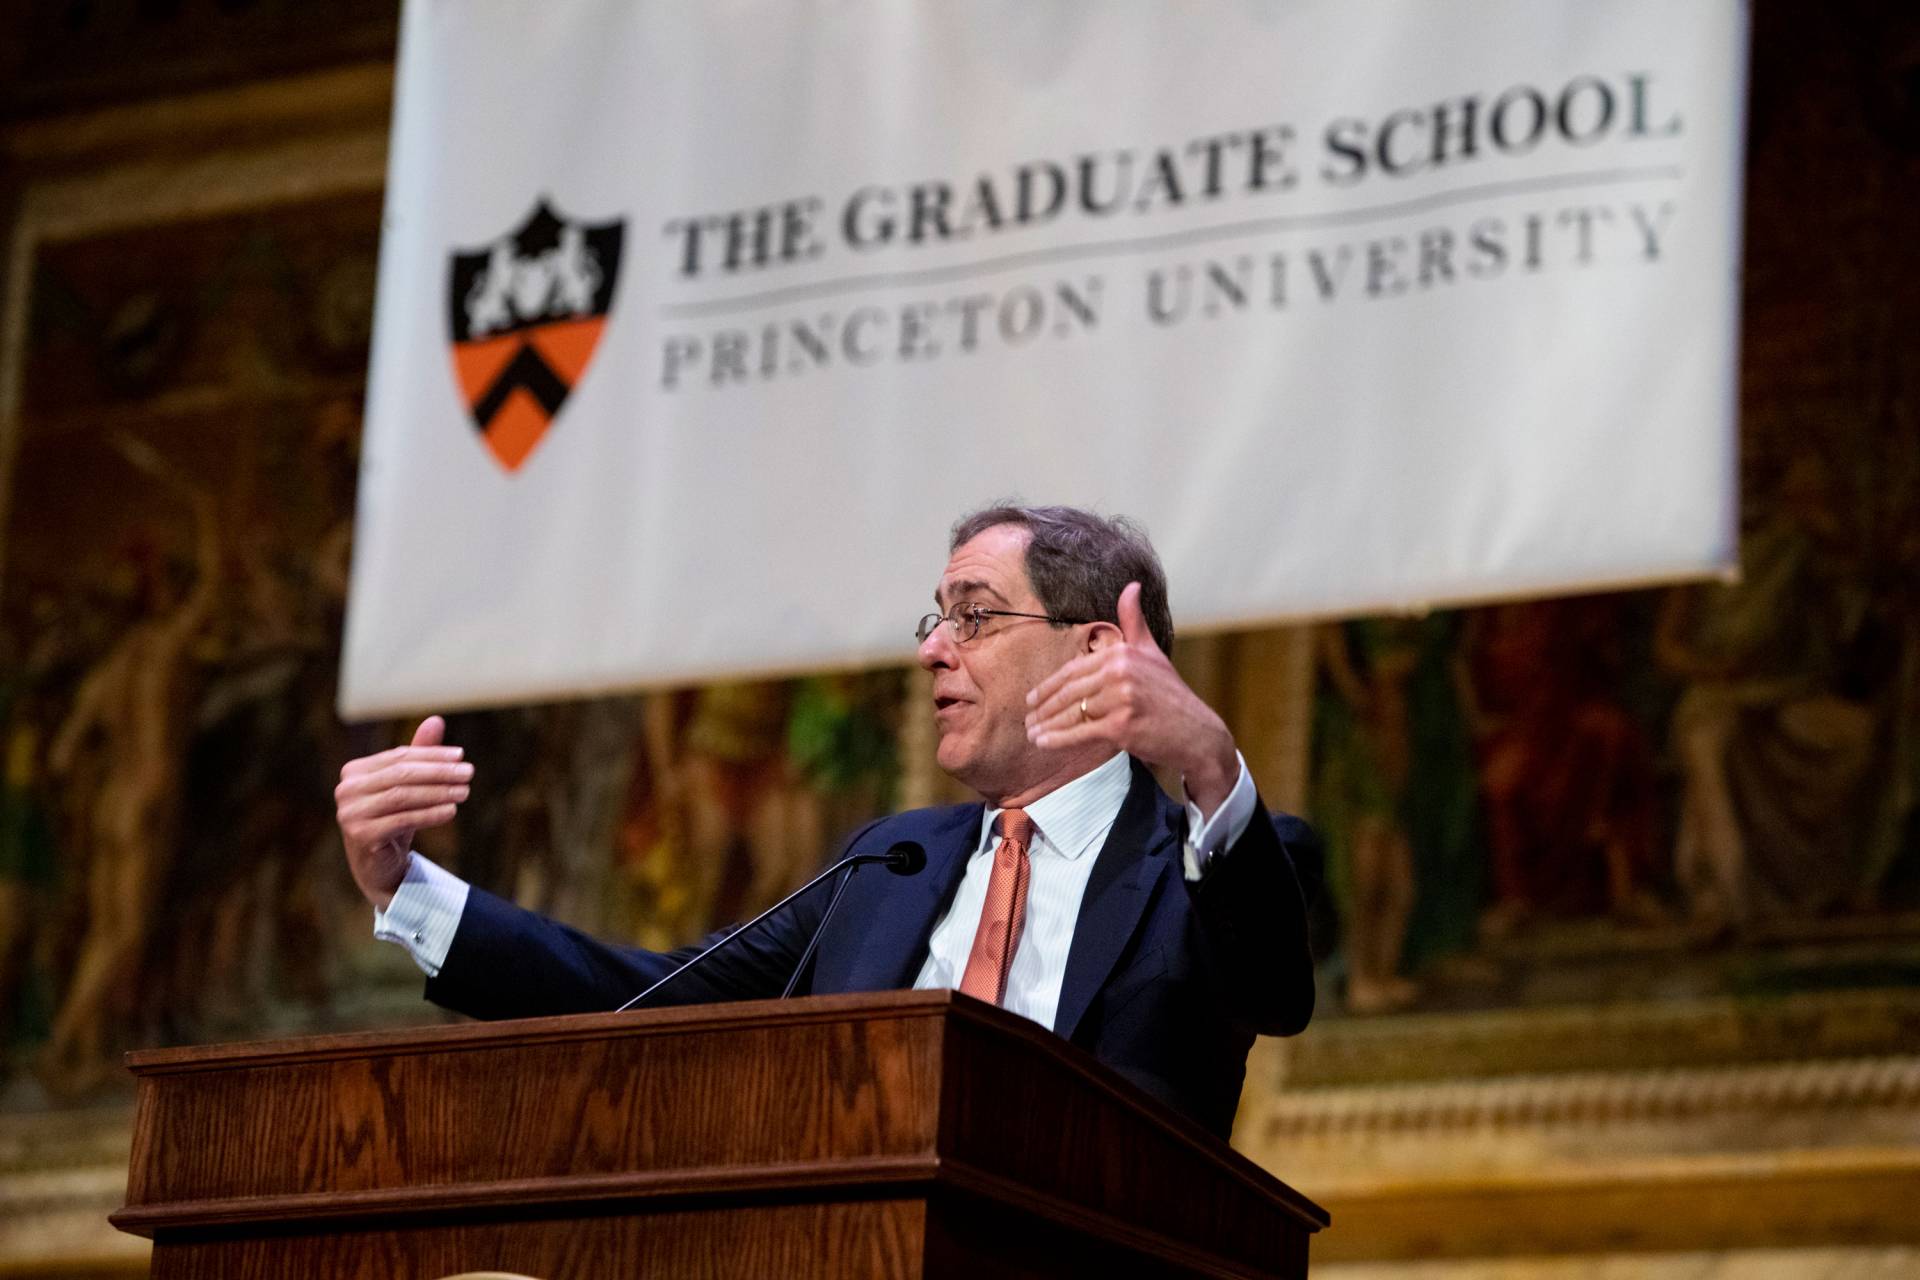 Christopher Eisgruber welcomes graduate students